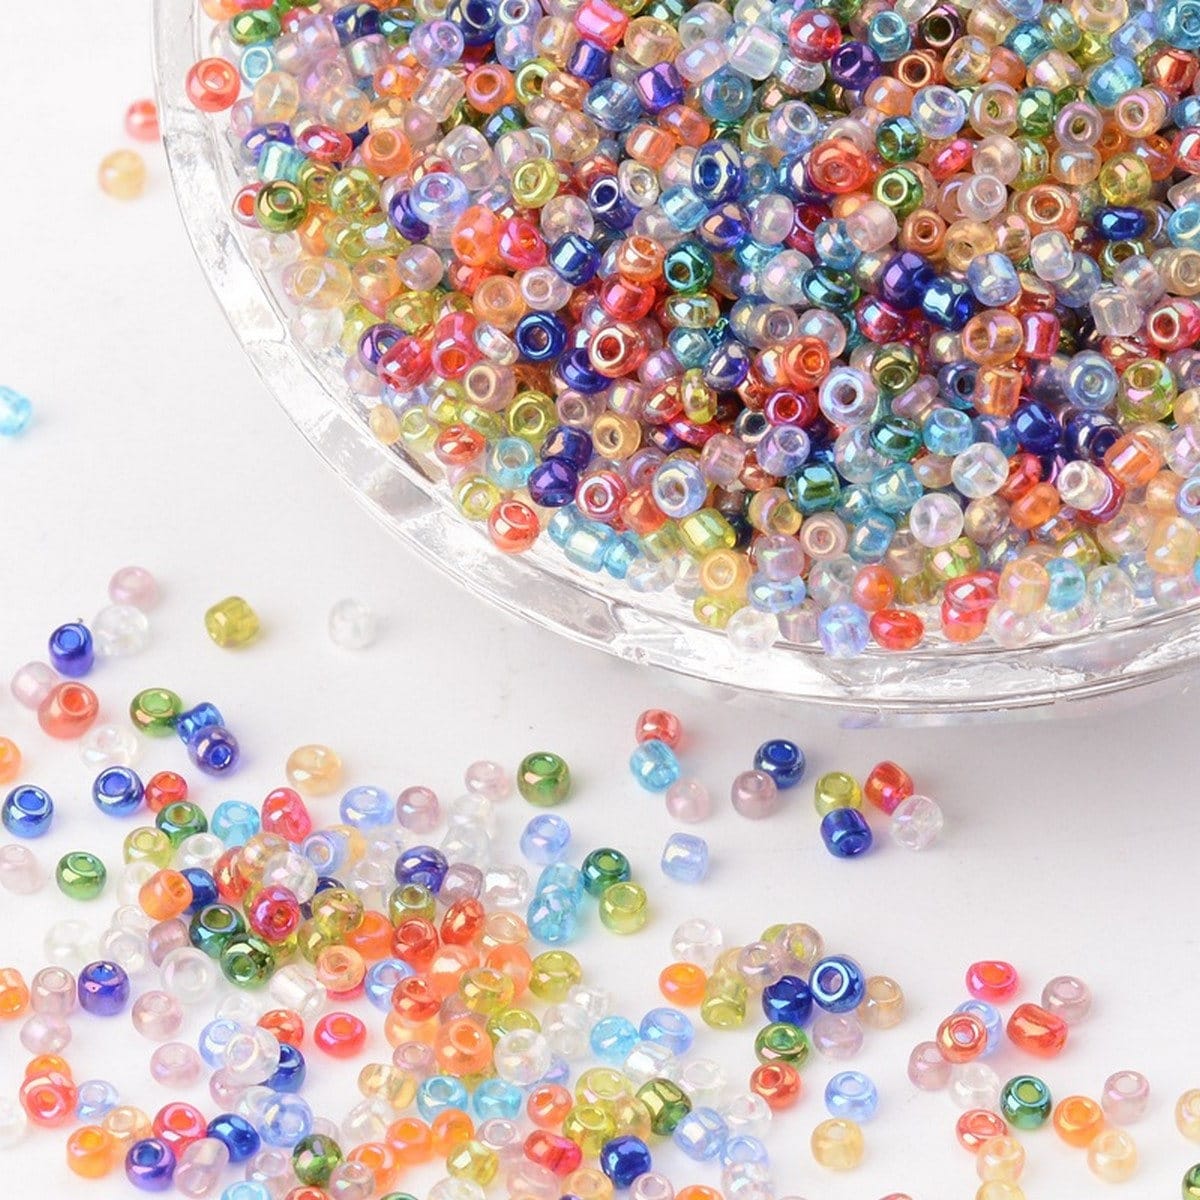 200-1000pcs 2/3/4mm Charm Czech Glass Seed Beads Round Spacer Beads For  Jewelry Making DIY Handmade Bracelet Necklace Earring